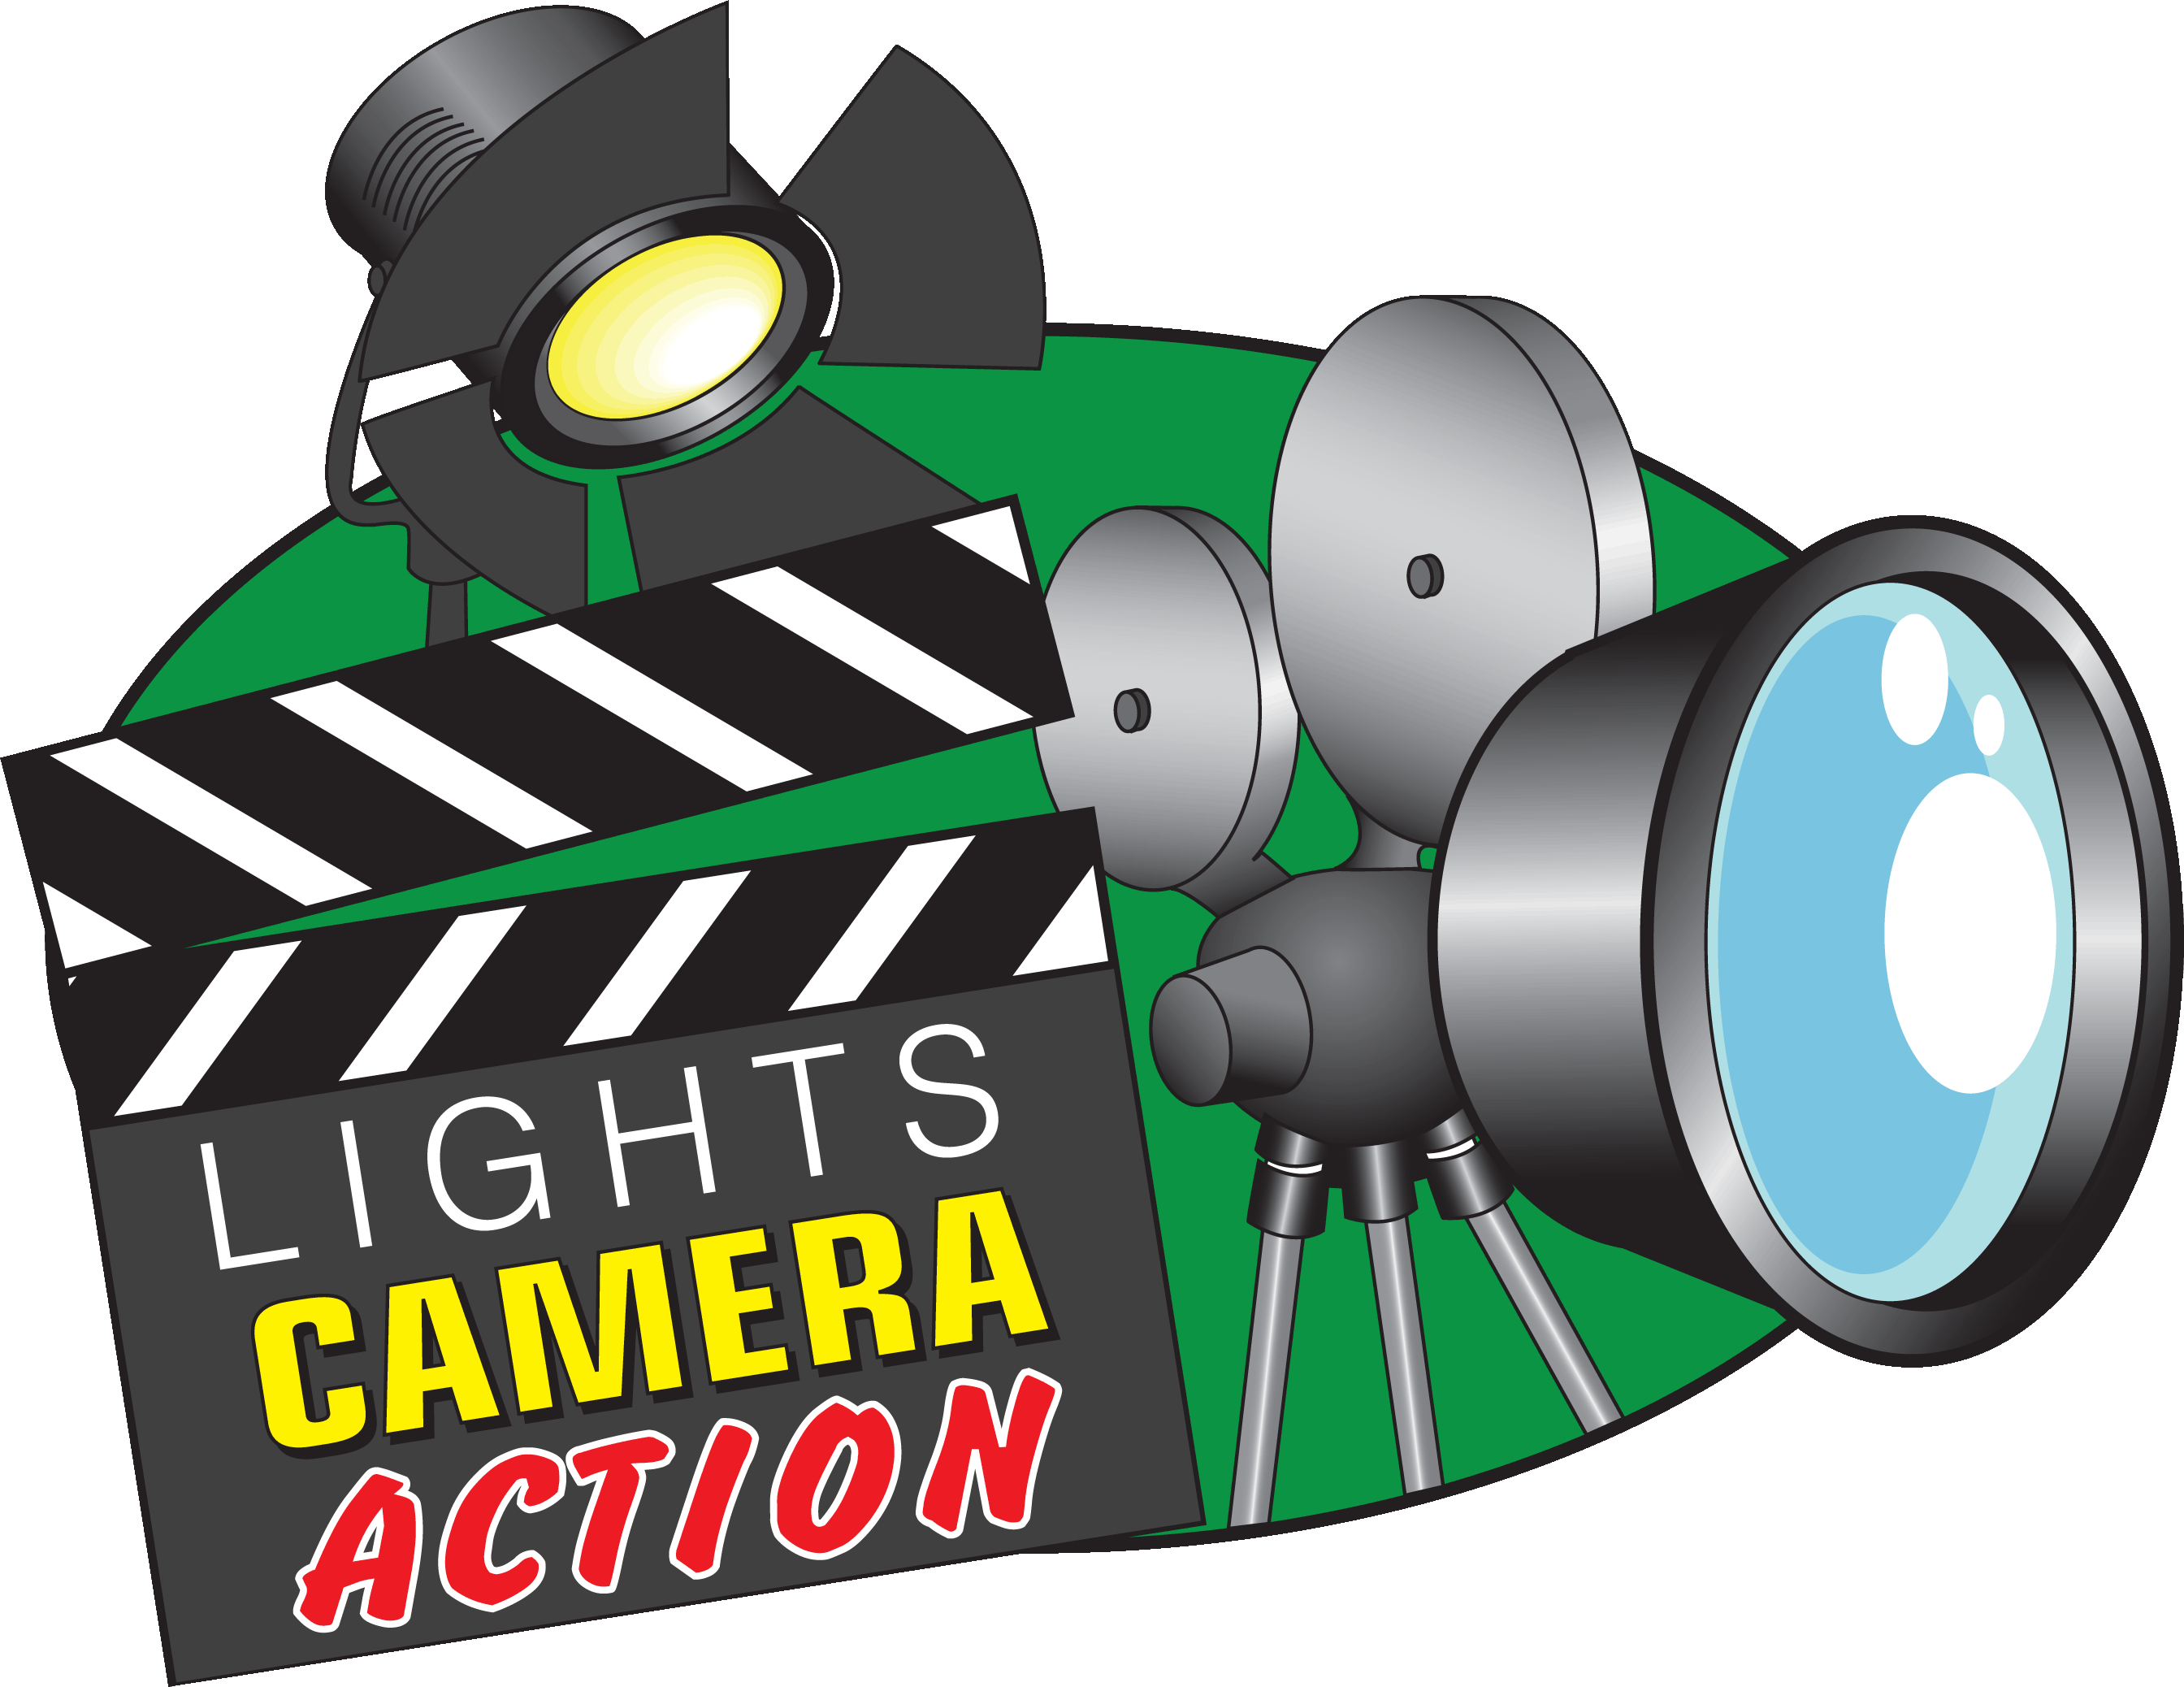 Lights Camera Action Clip Art - Clipart library